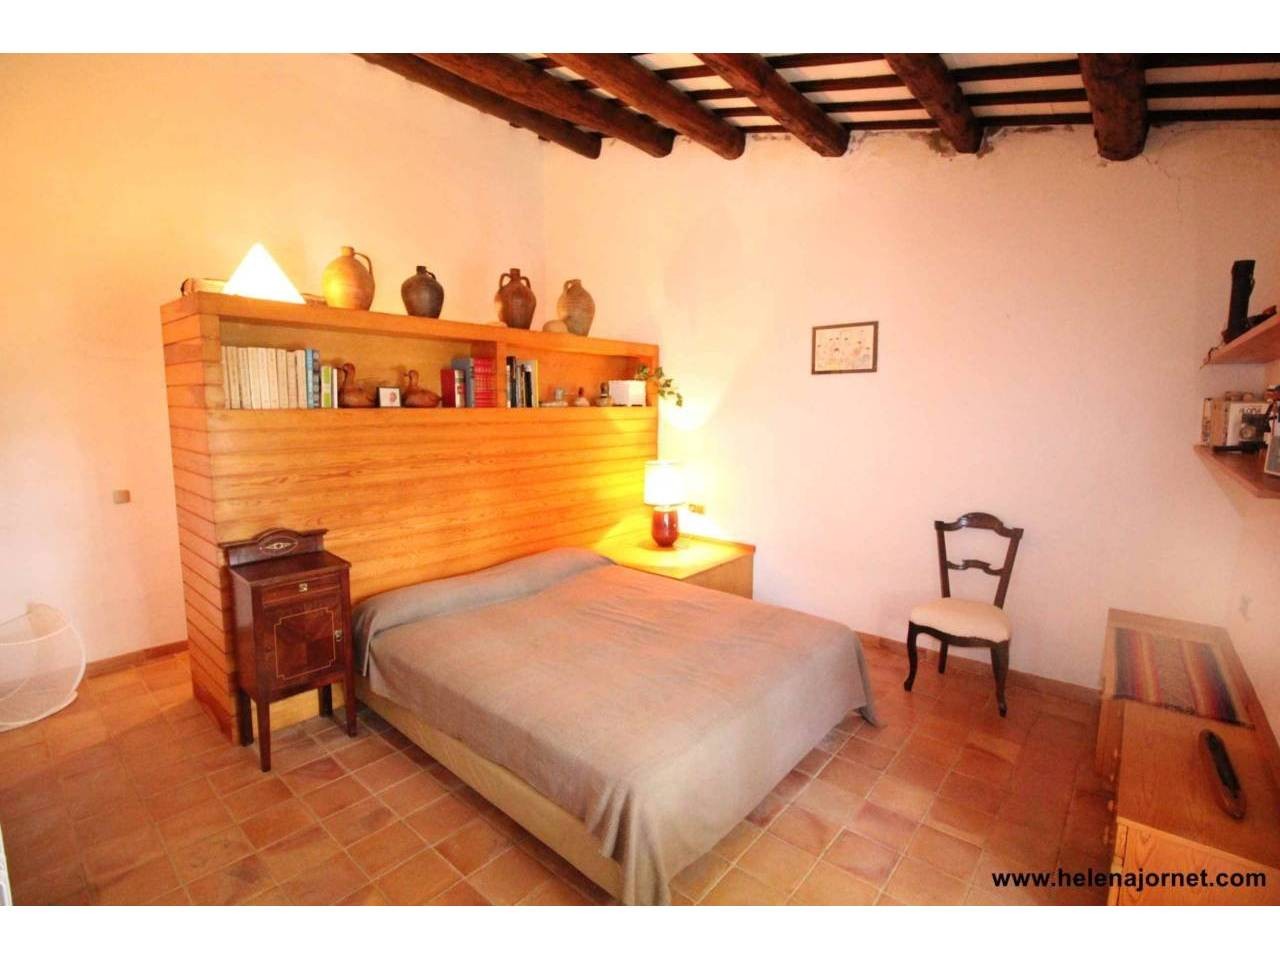 Exclusive Catalan farmhouse totally refurbished with swimming pool and wonderful garden - 2388